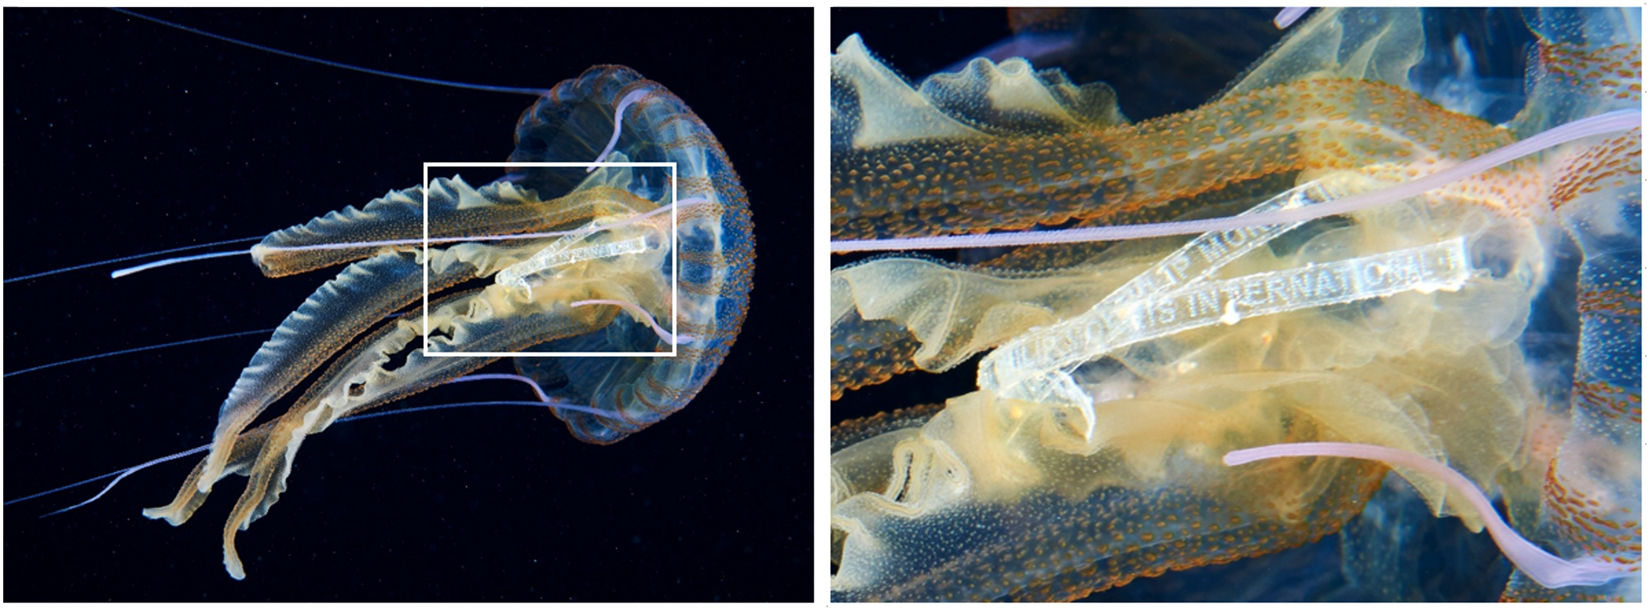 Episodic records of jellyfish ingestion of plastic items reveal a novel pathway for trophic transference of marine litter